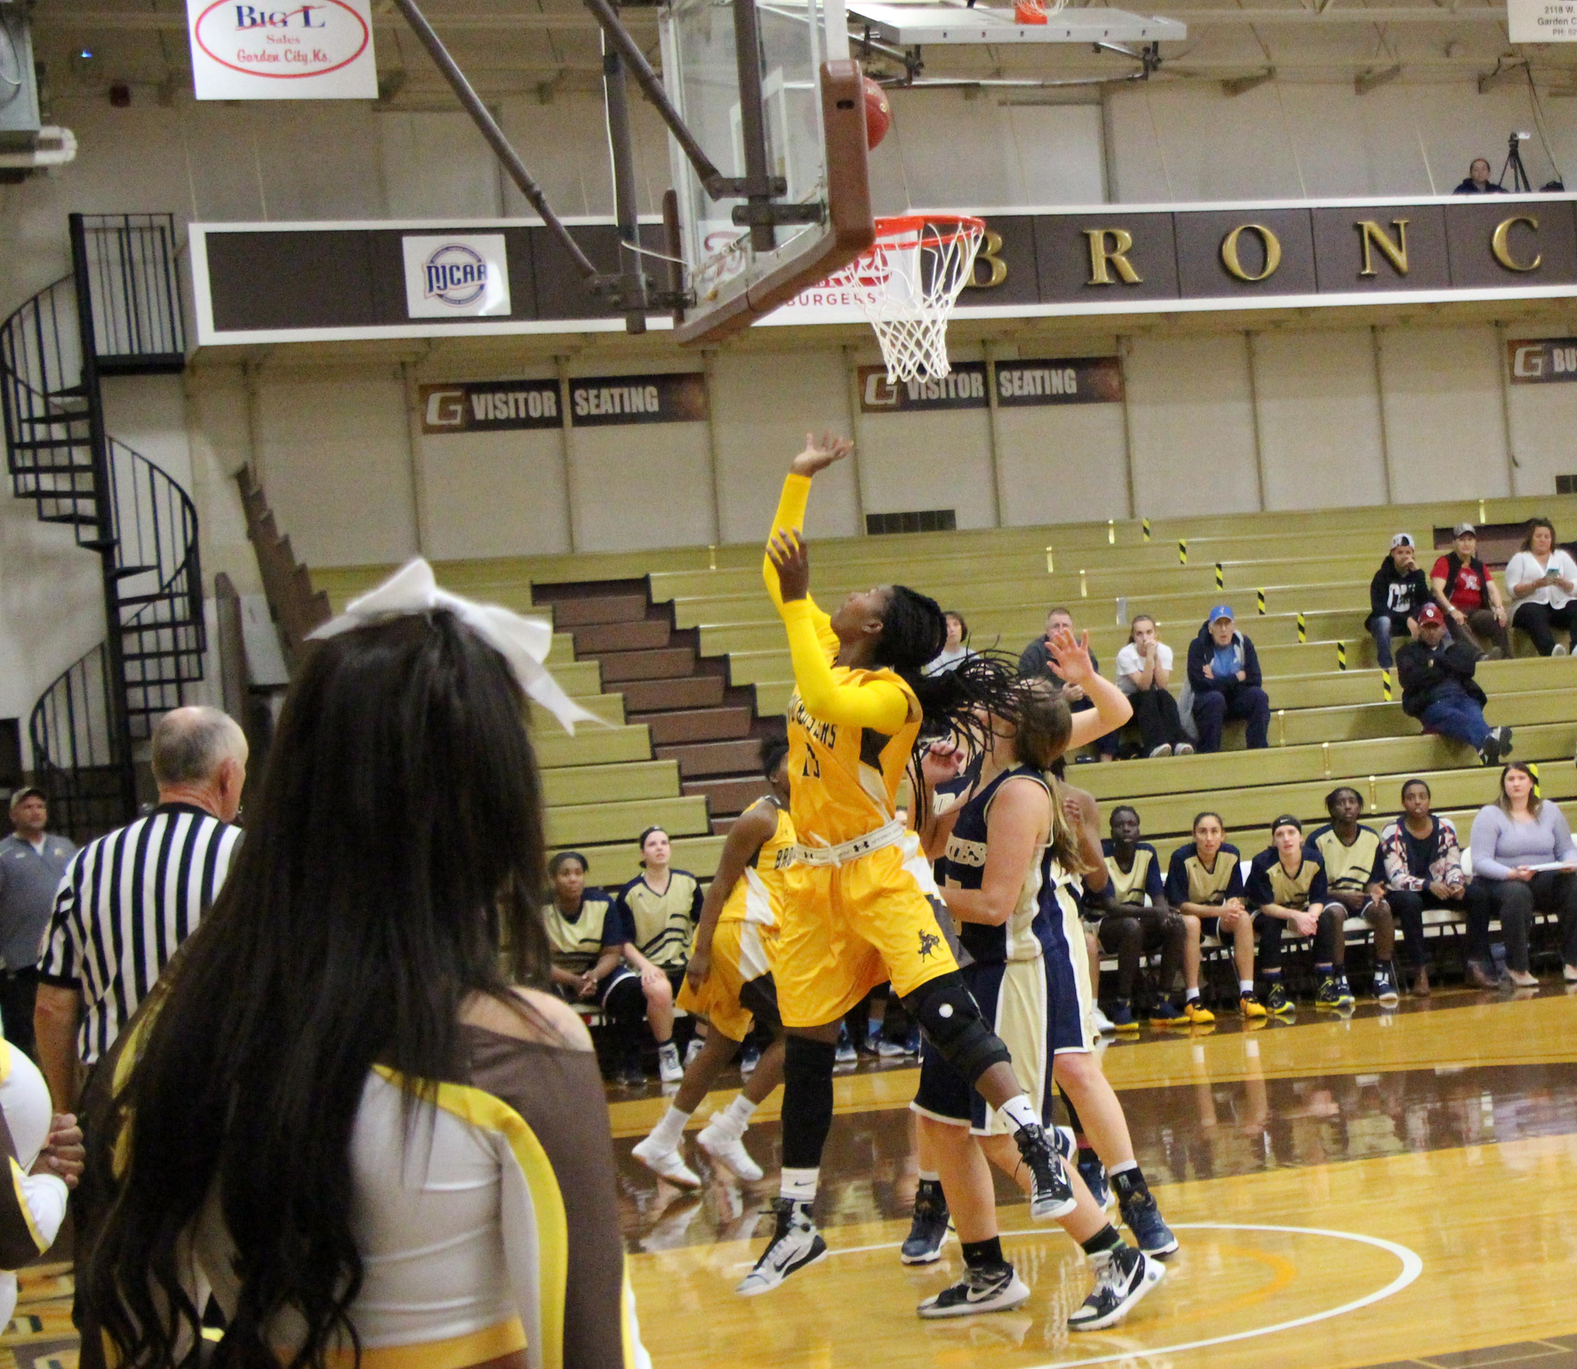 Lewis and Mckee lead the way in Broncbusters win over Independence